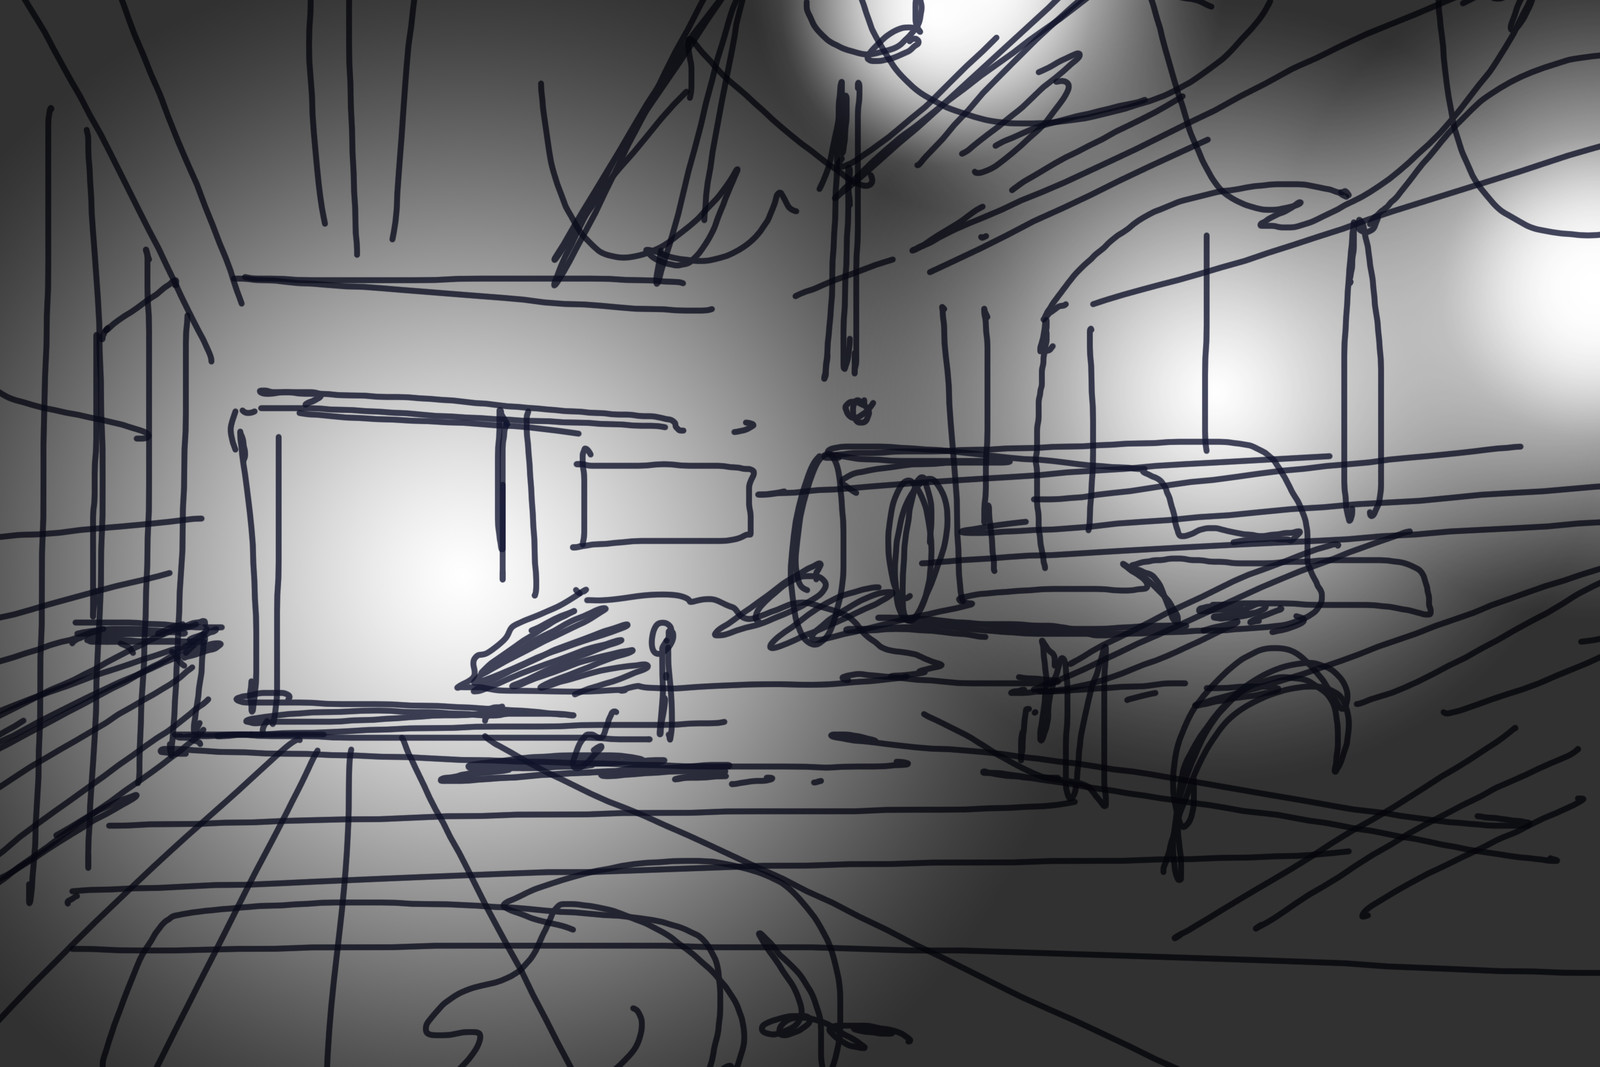 first one minute thumbnail.....I kinda like this scale better